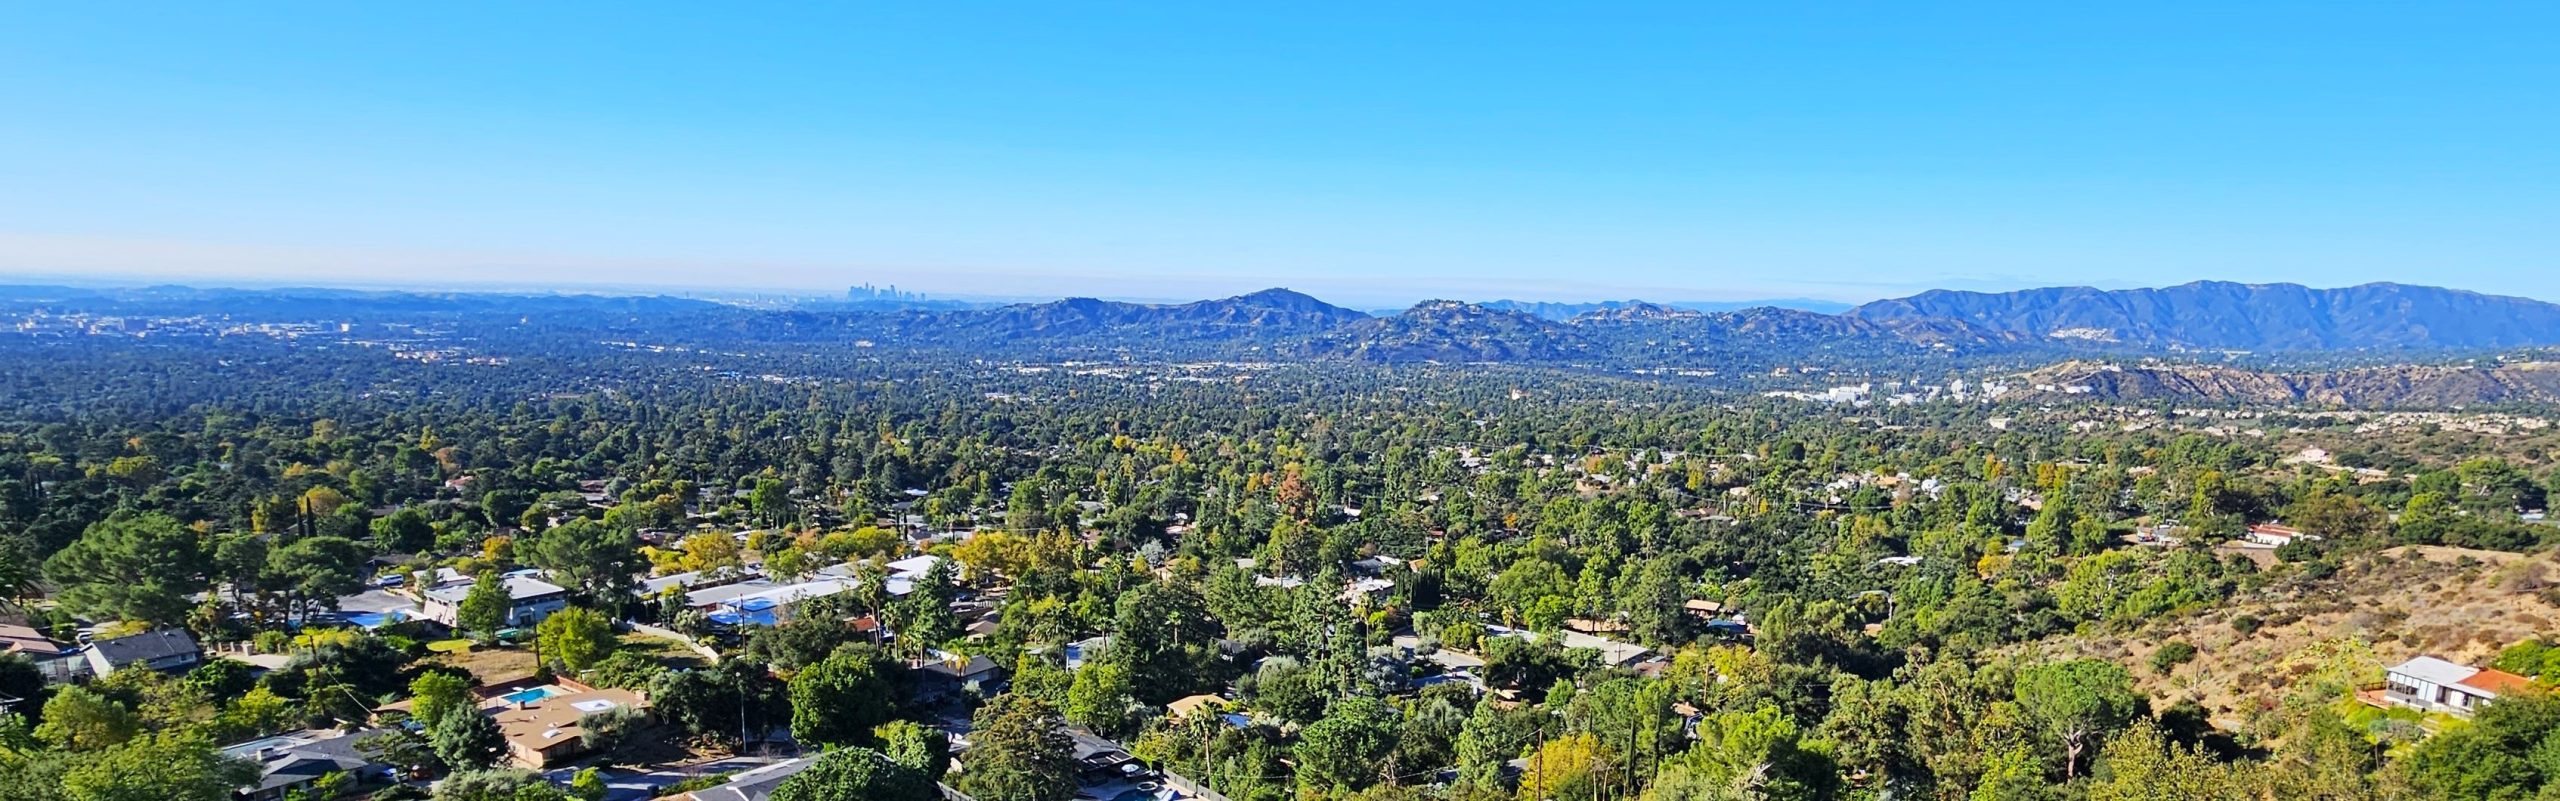 The most amazing view lot in all of Altadena